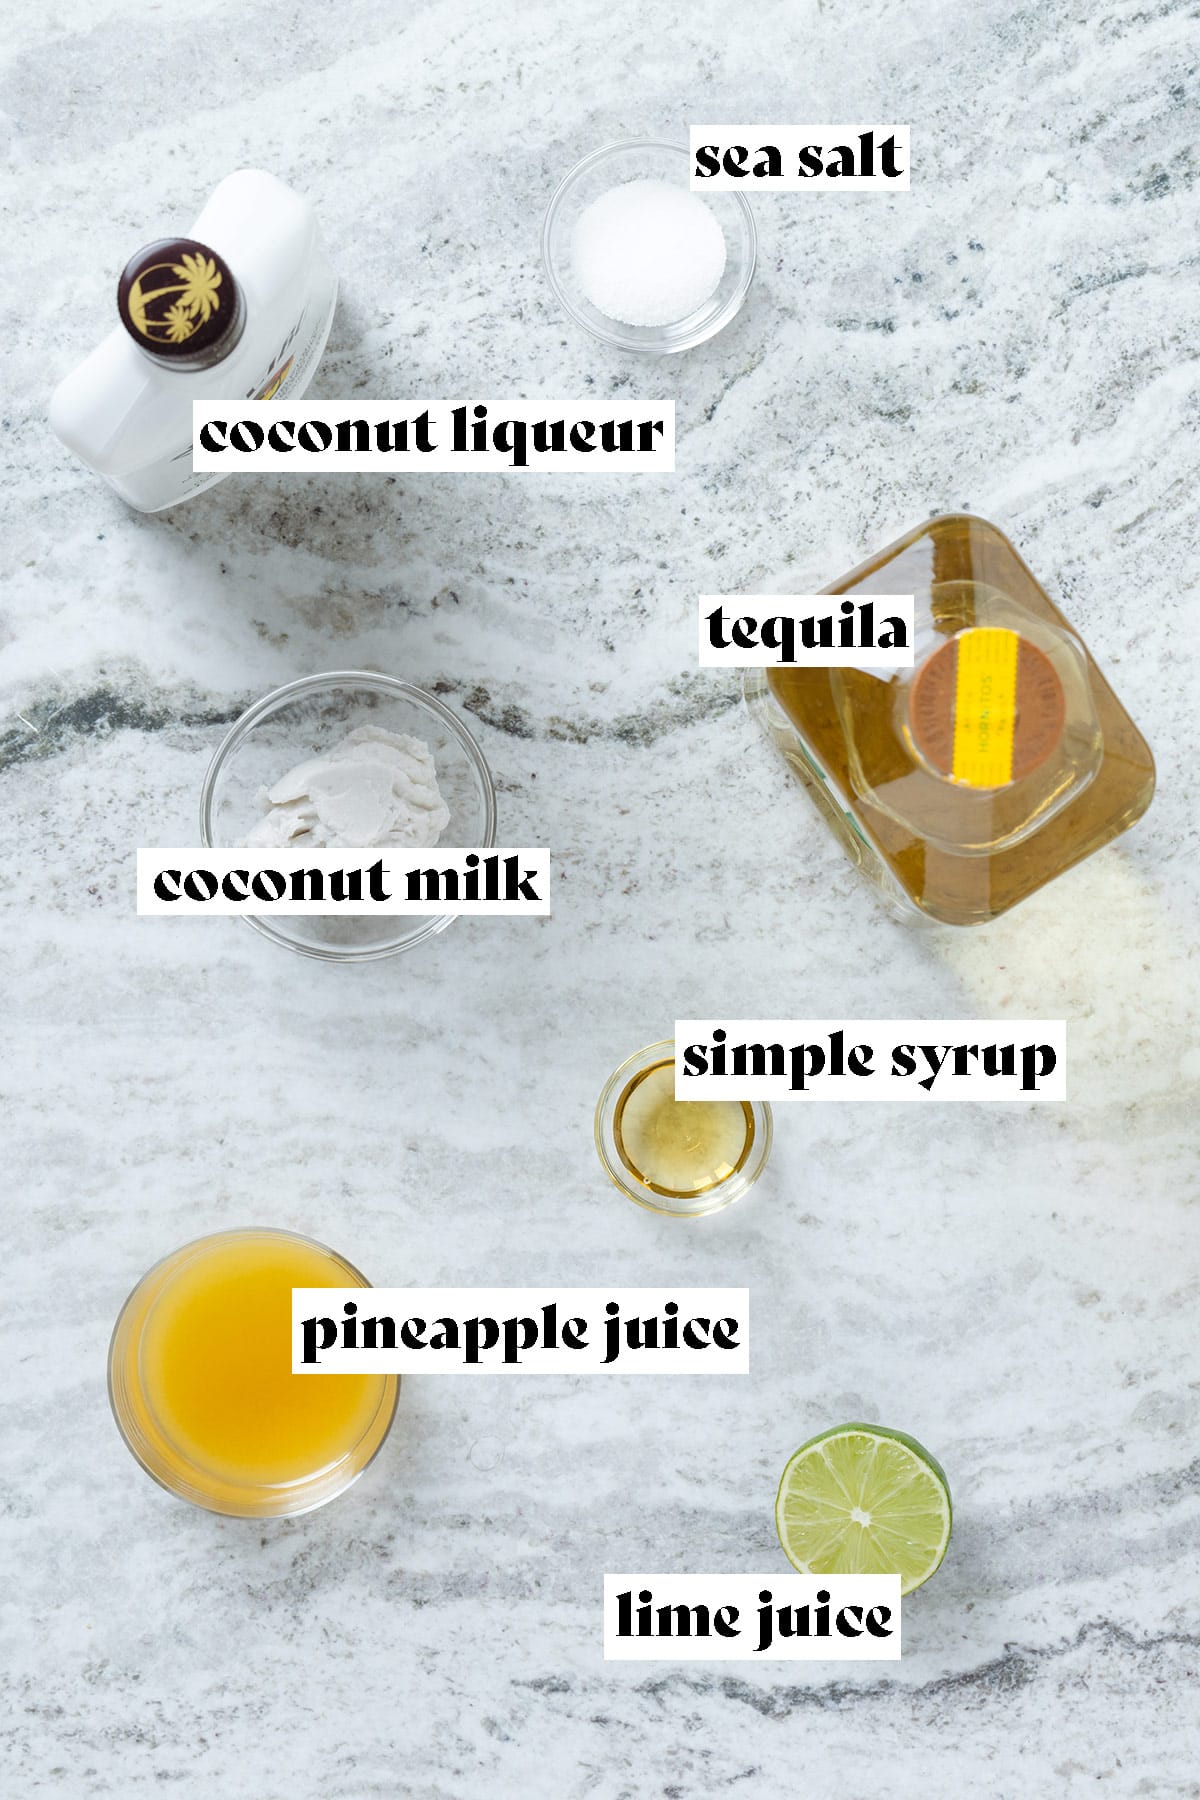 Ingredients like tequila, coconut rum, coconut cream, and pineapple juice laid out on a stone background.